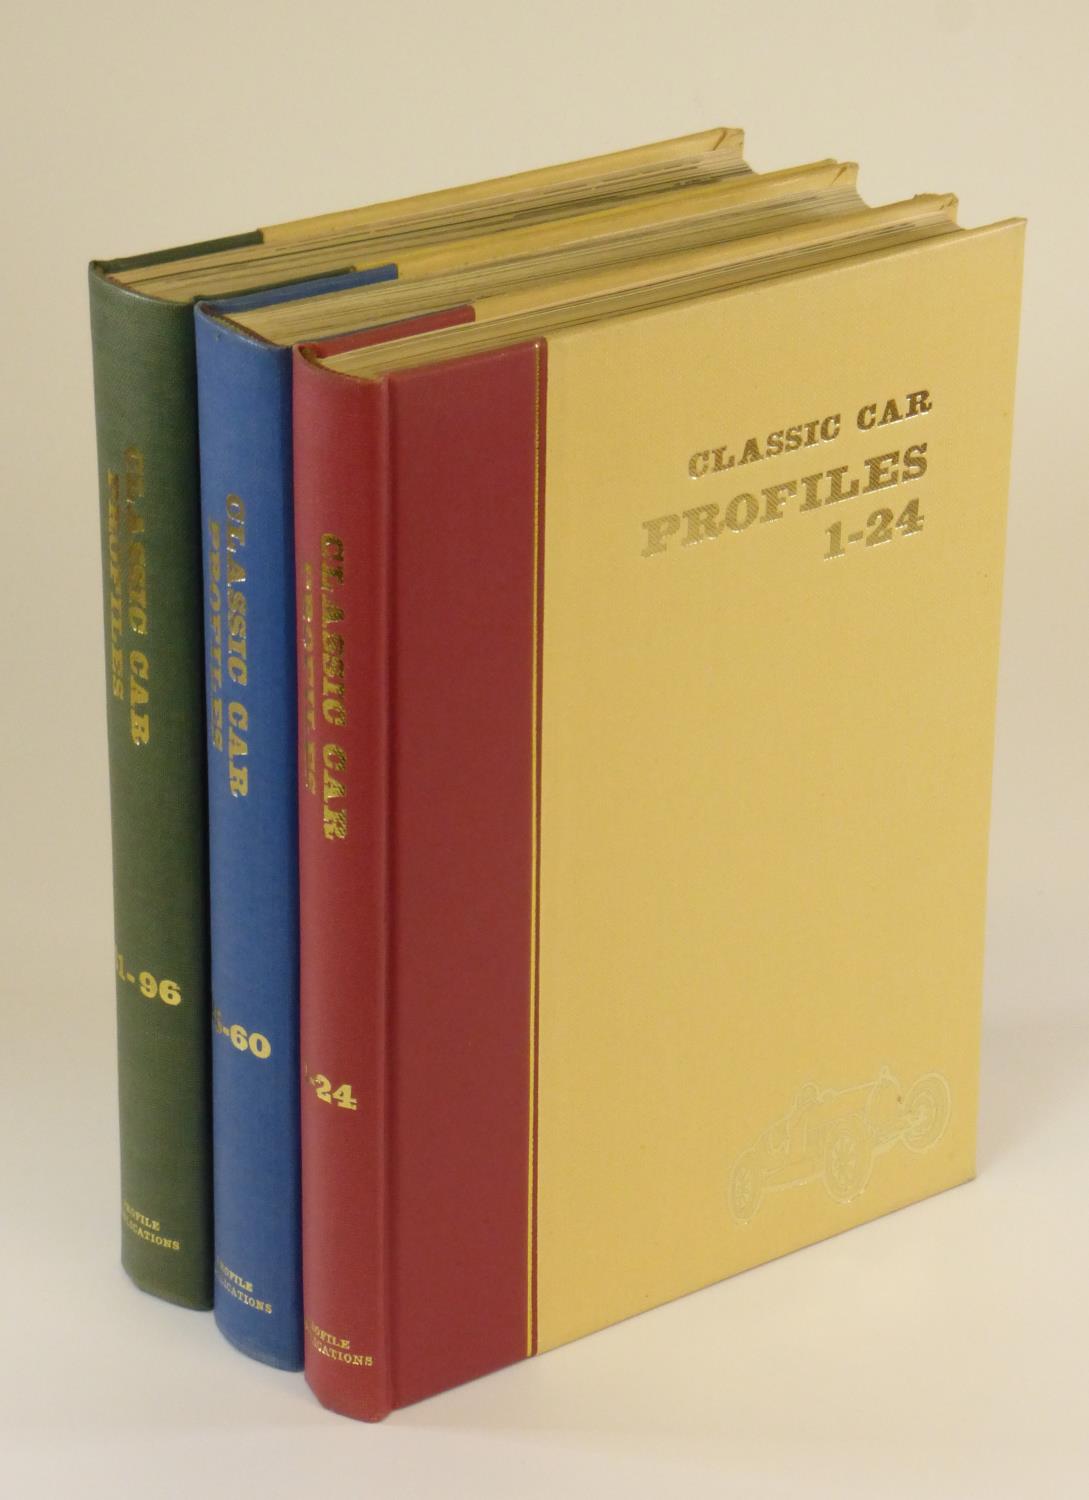 Classic Car Profiles, being hardbound volumes containing Profiles 1-24, 25-60 and 61-96